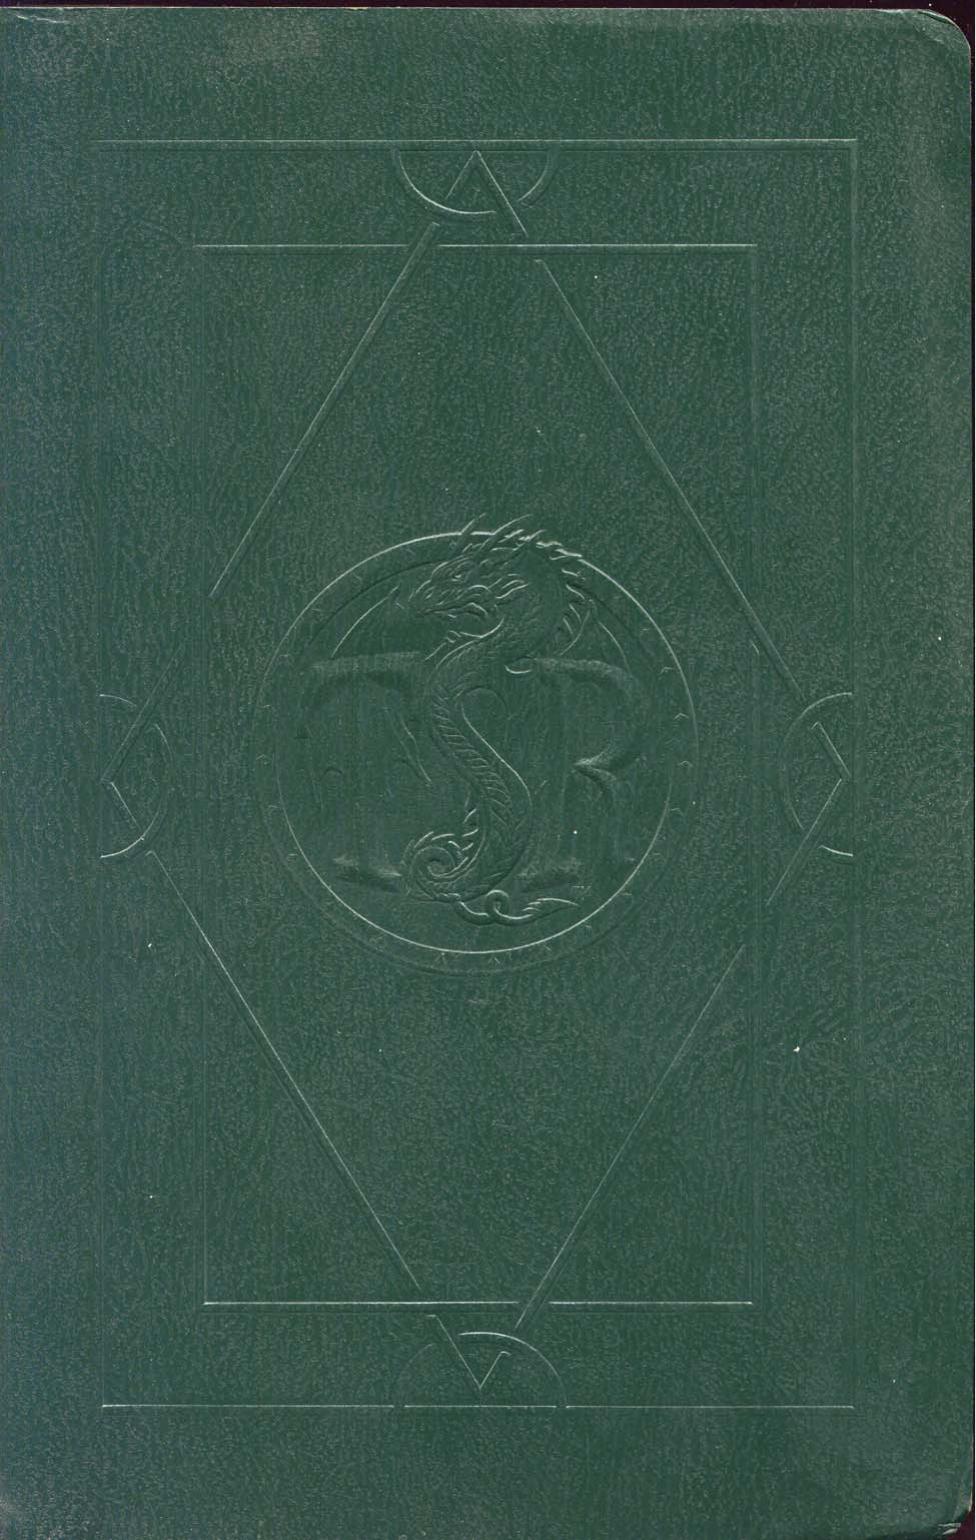 Encyclopedia Magica Volume 3 - Pick of Earth Parting to Thesis on Conditional Ruptures